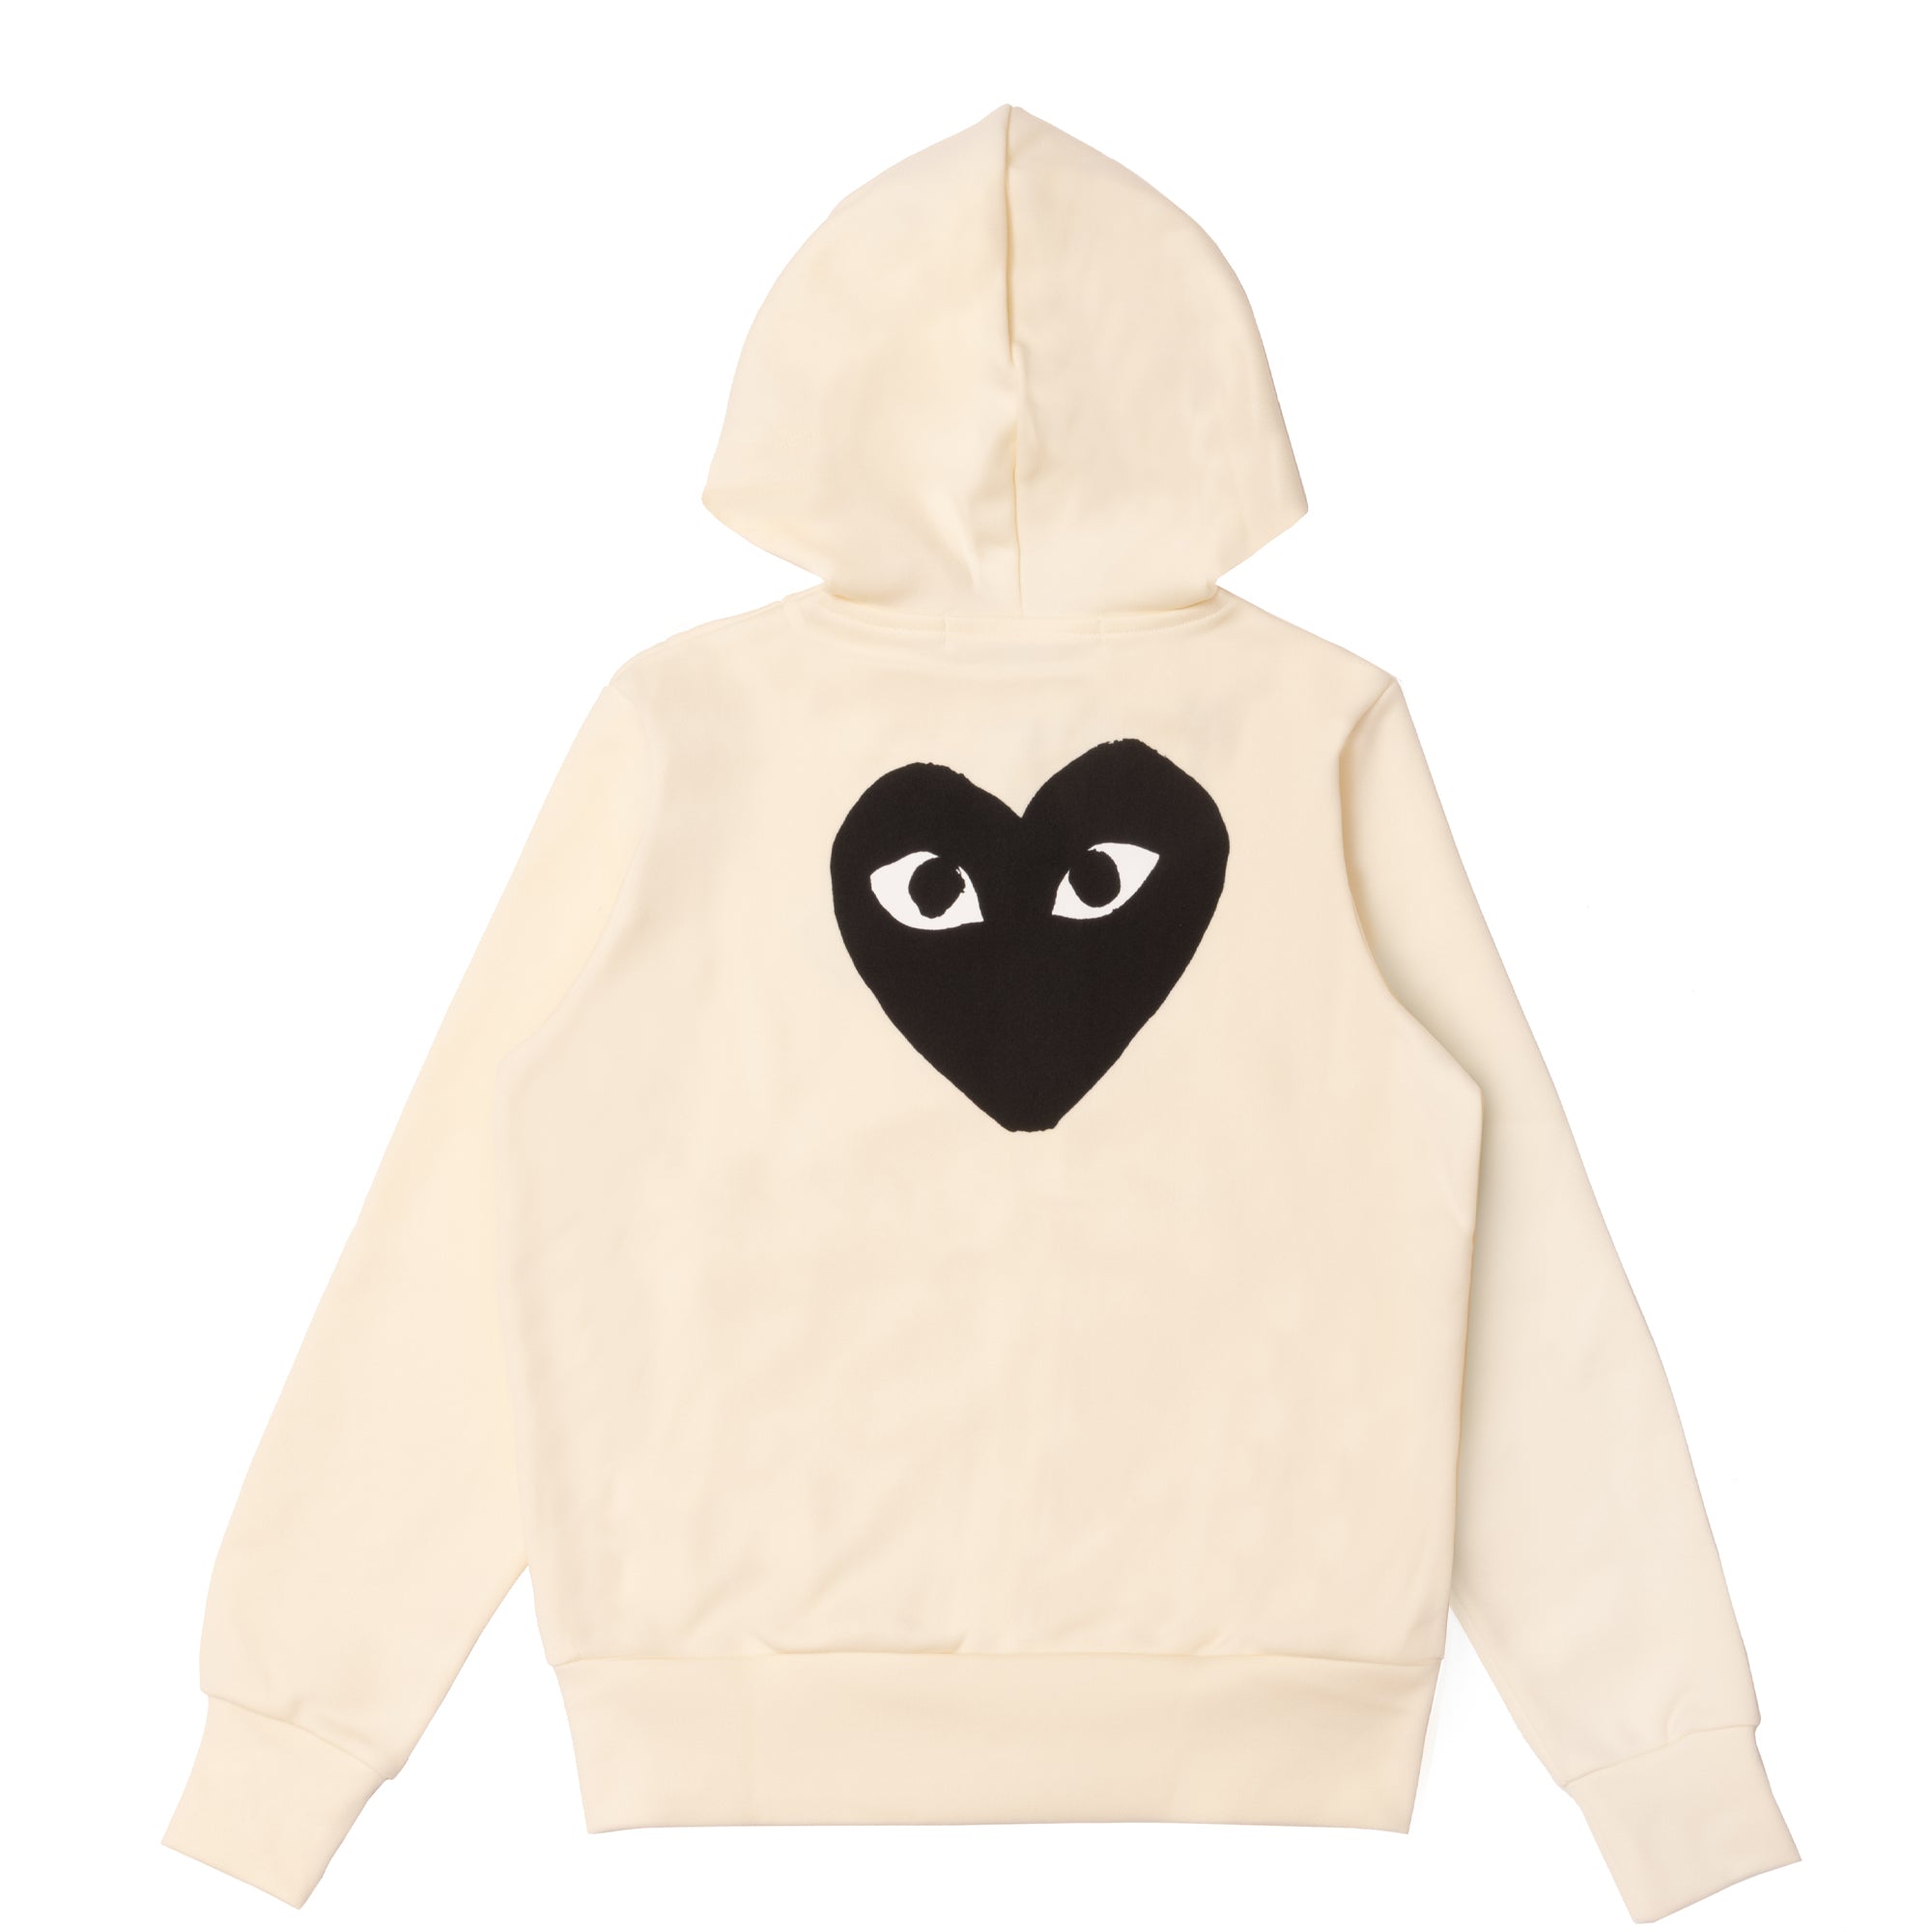 PLAY CDG - HOODED SWEATSHIRT WITH BIG HEART - (IVORY) view 1